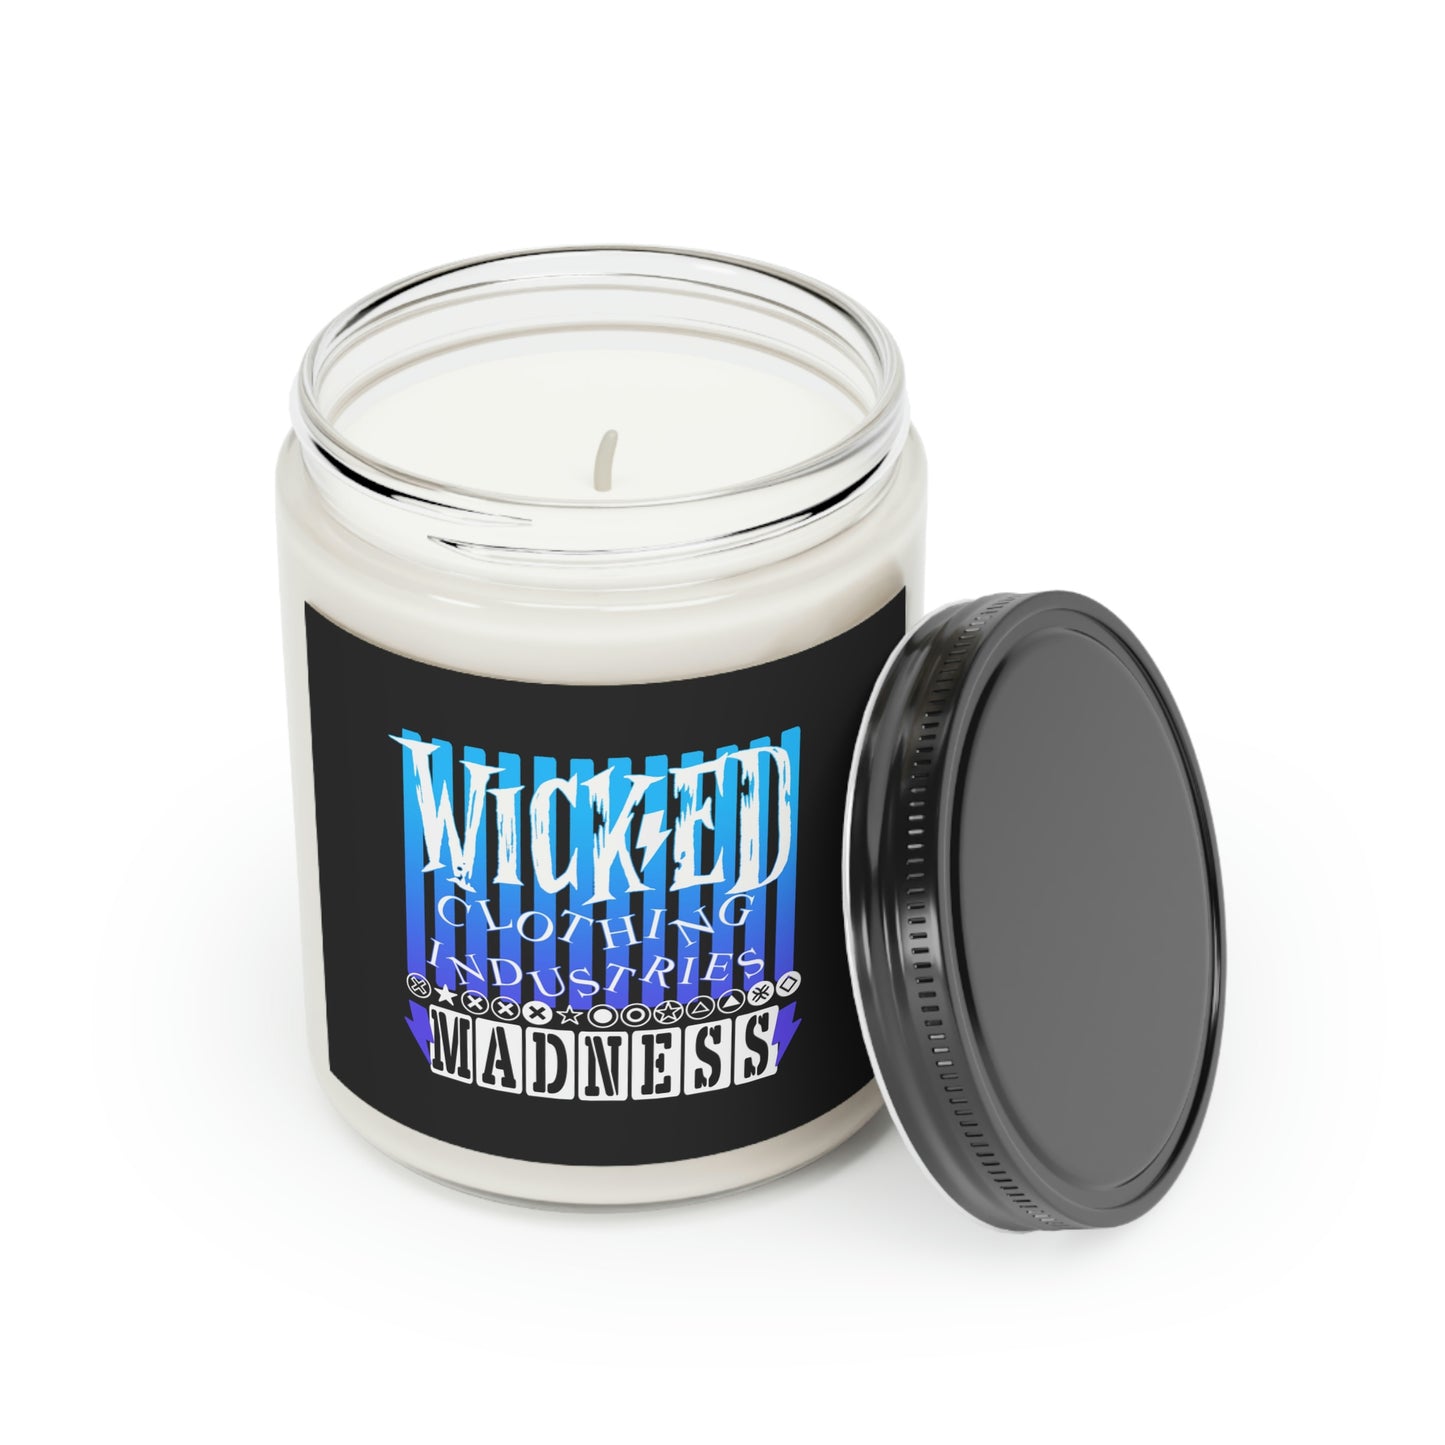 Wicked Madness Scented Candle, 9oz